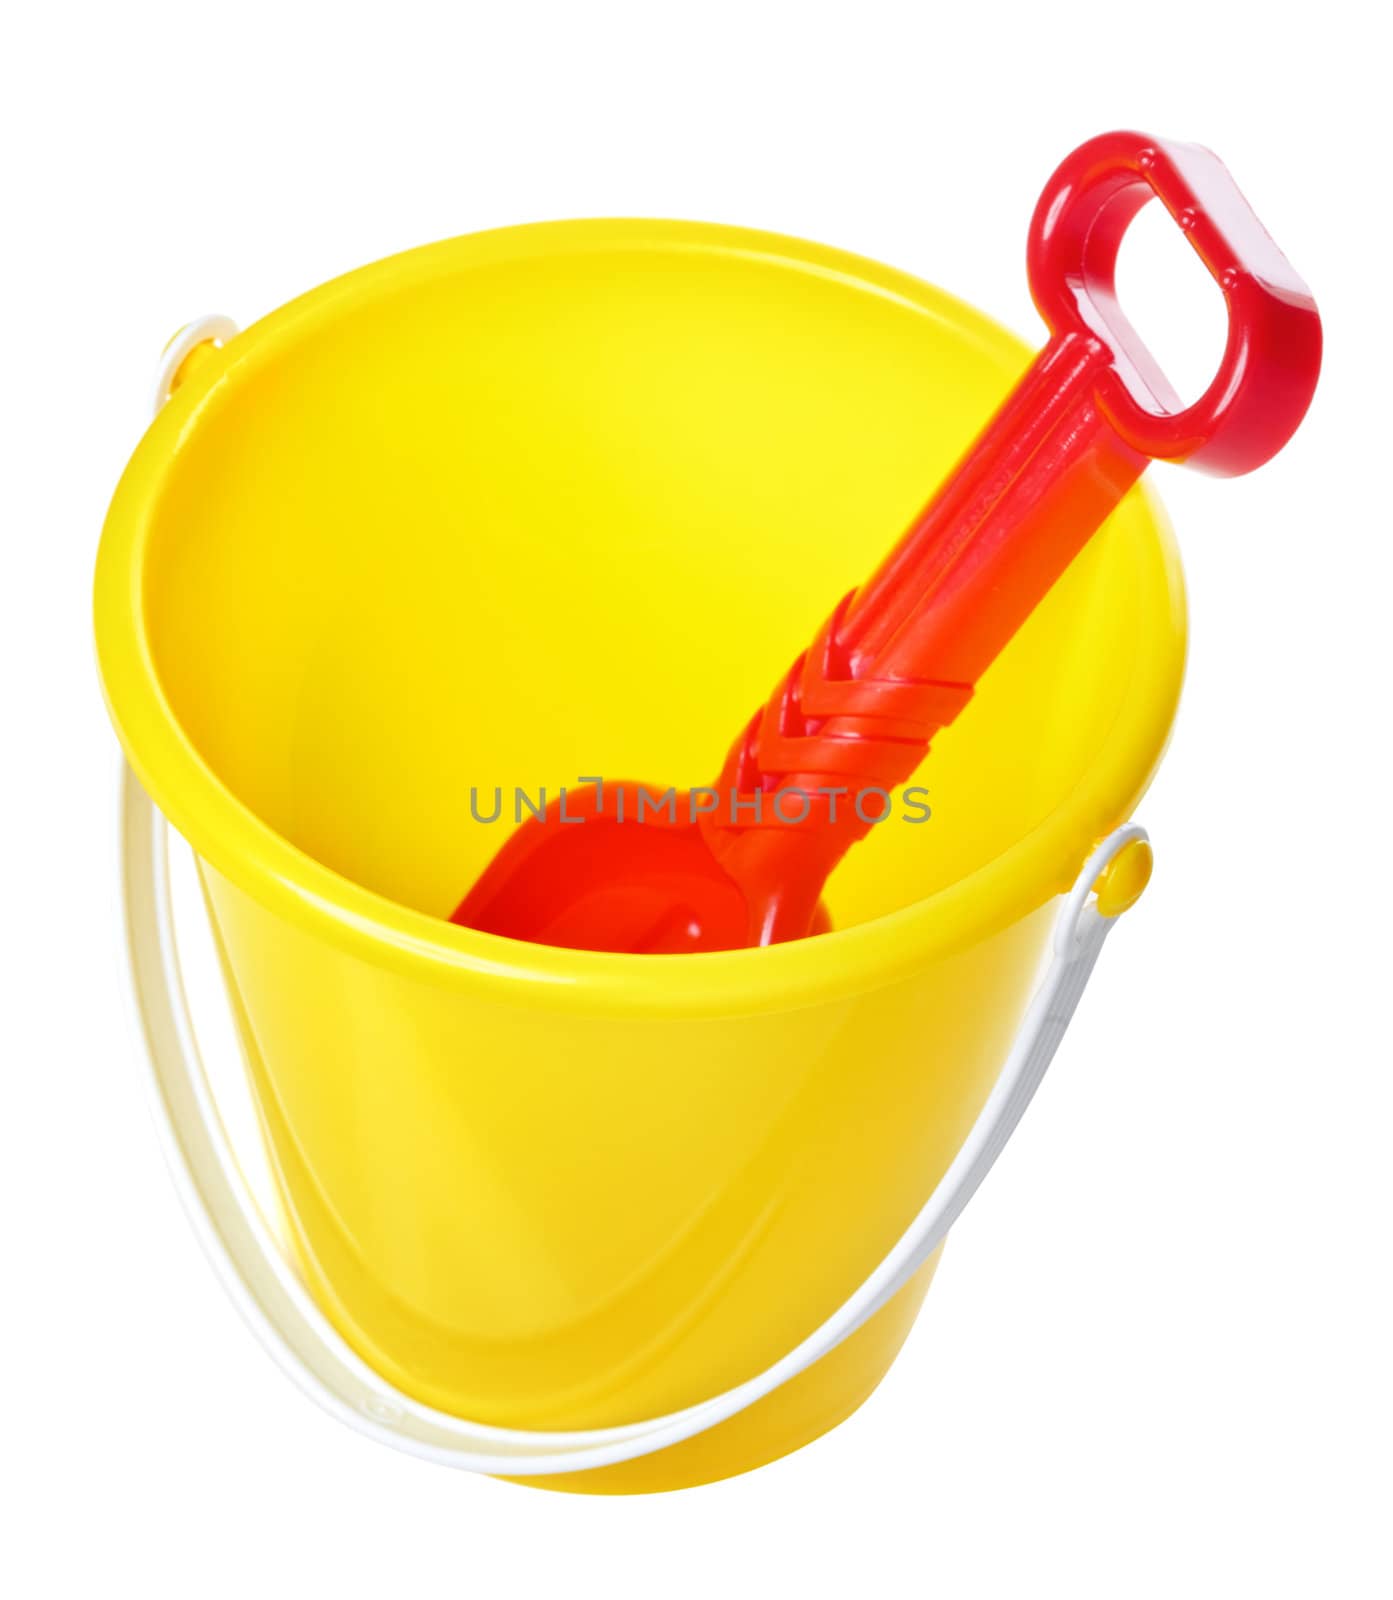 Toy Bucket And Scoop by petr_malyshev